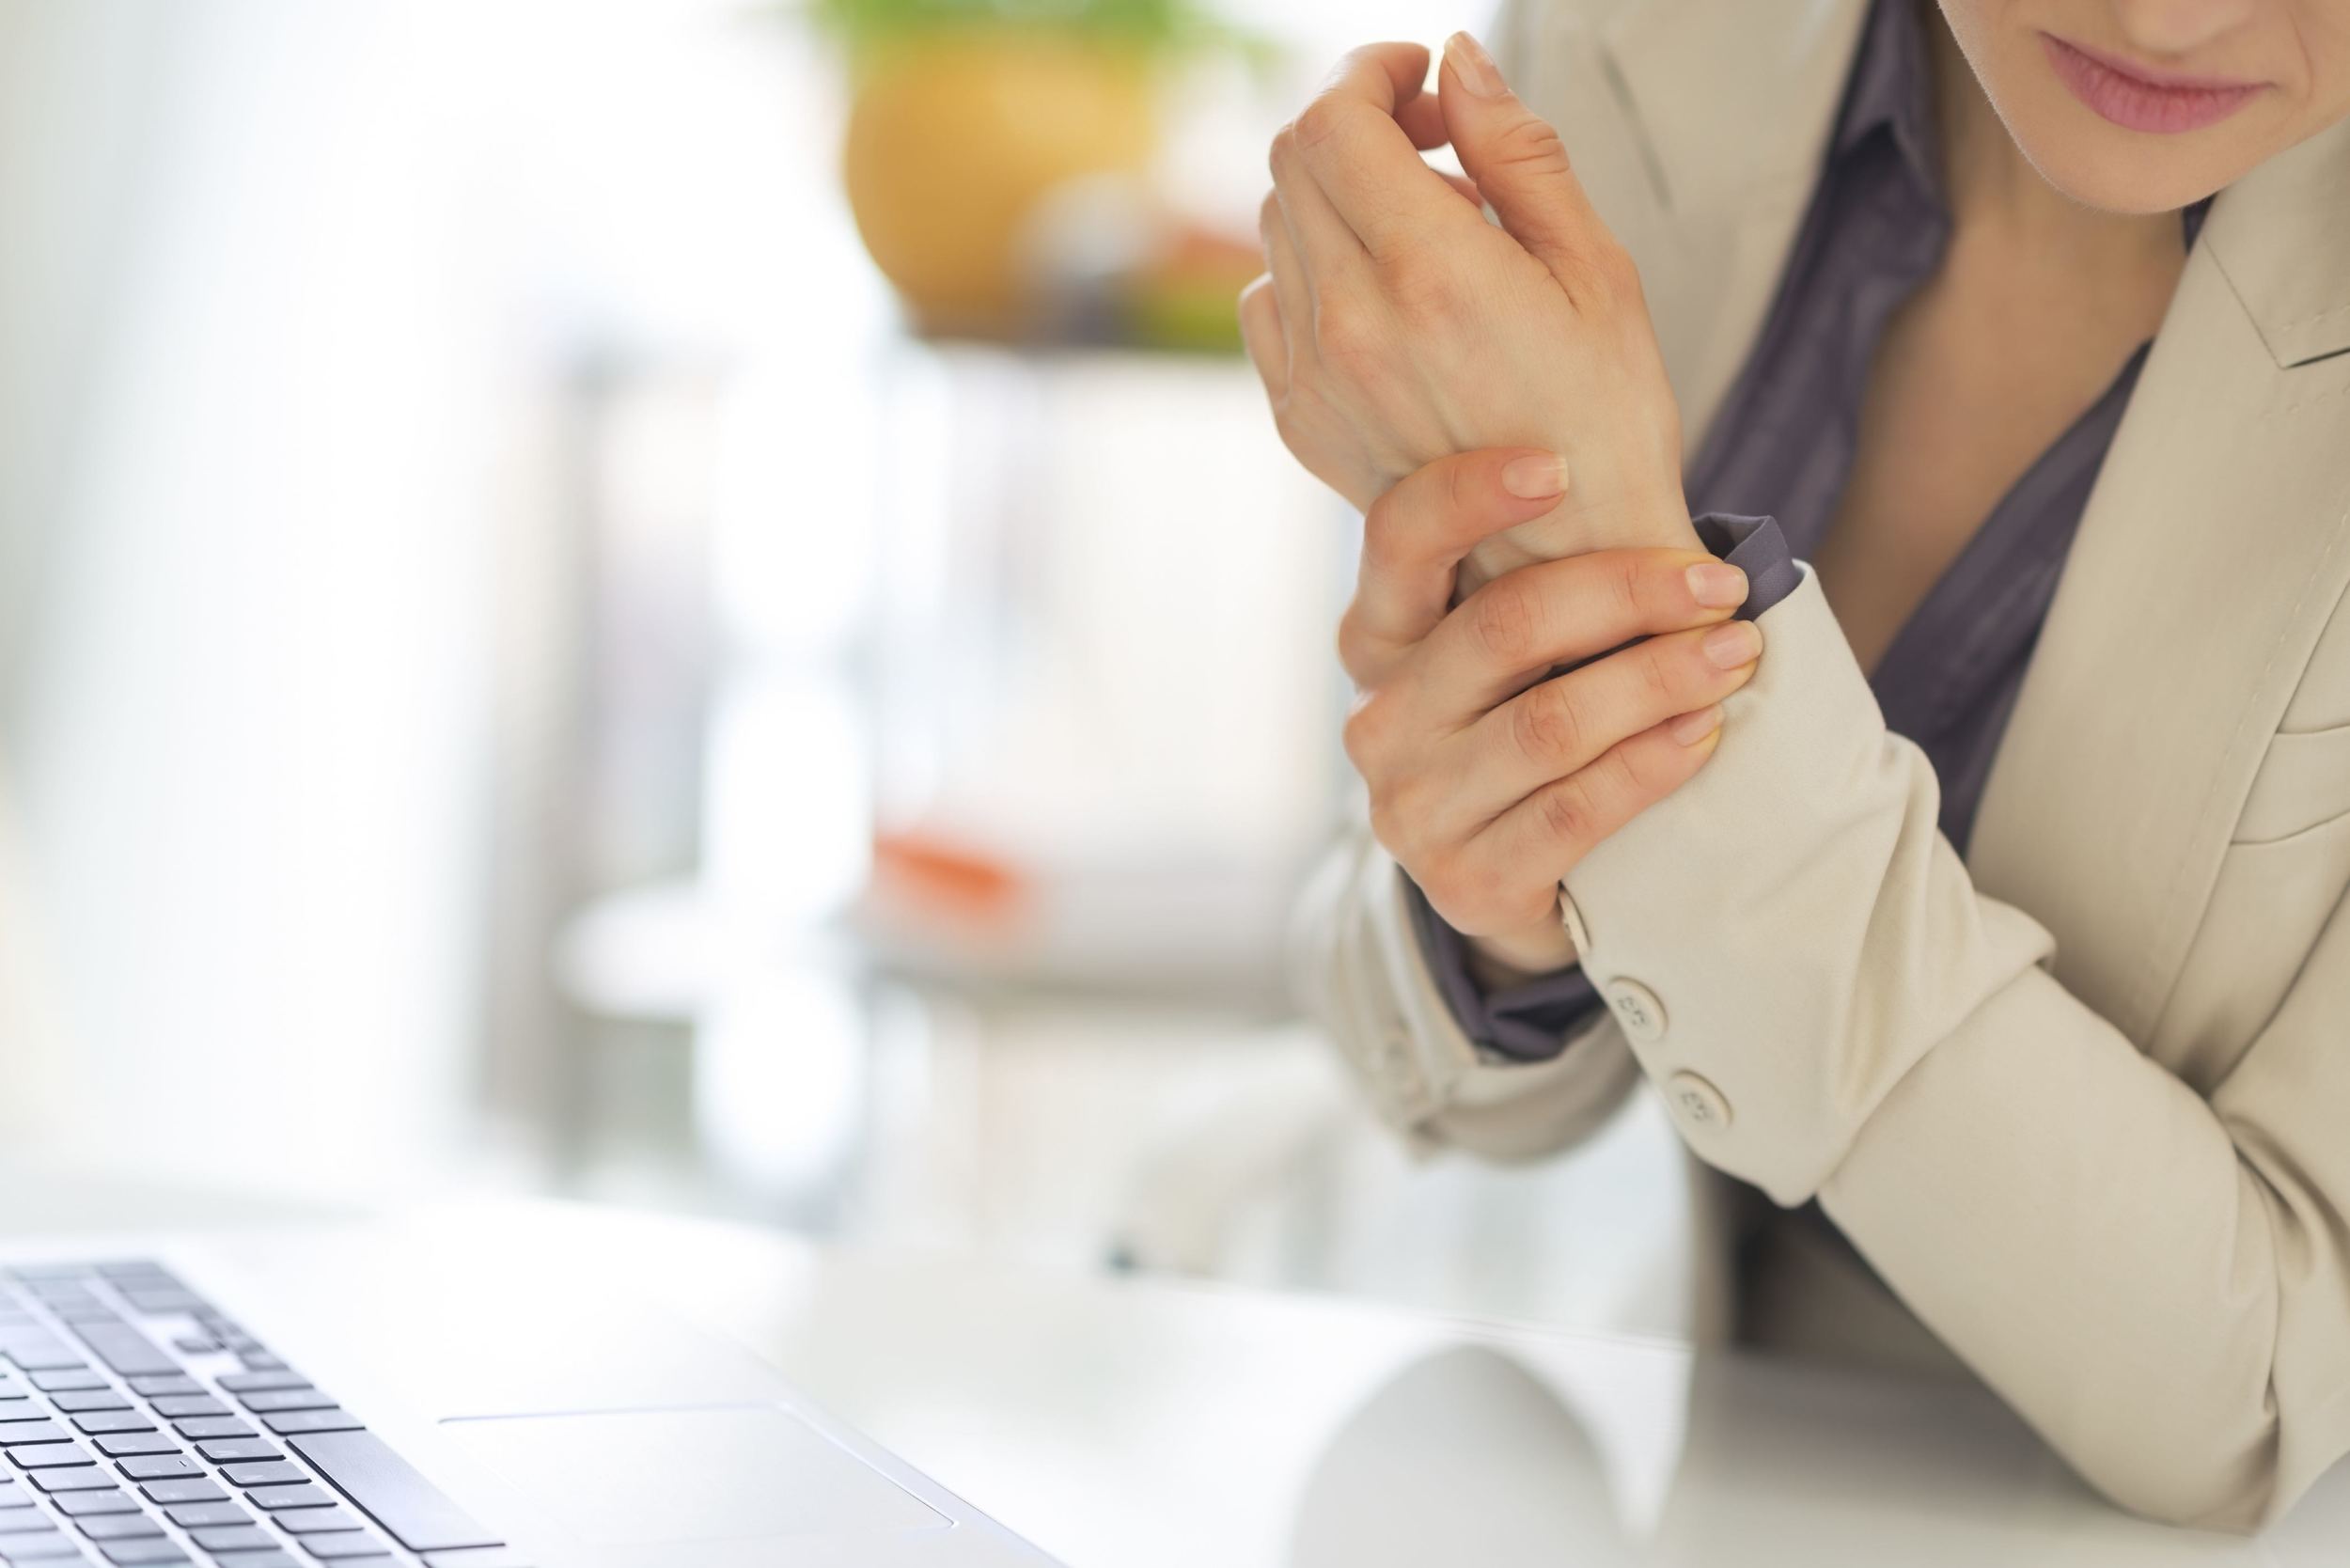 Injured Workers Should Notify Their Employers About a Work Related Injury as Soon as Practicable